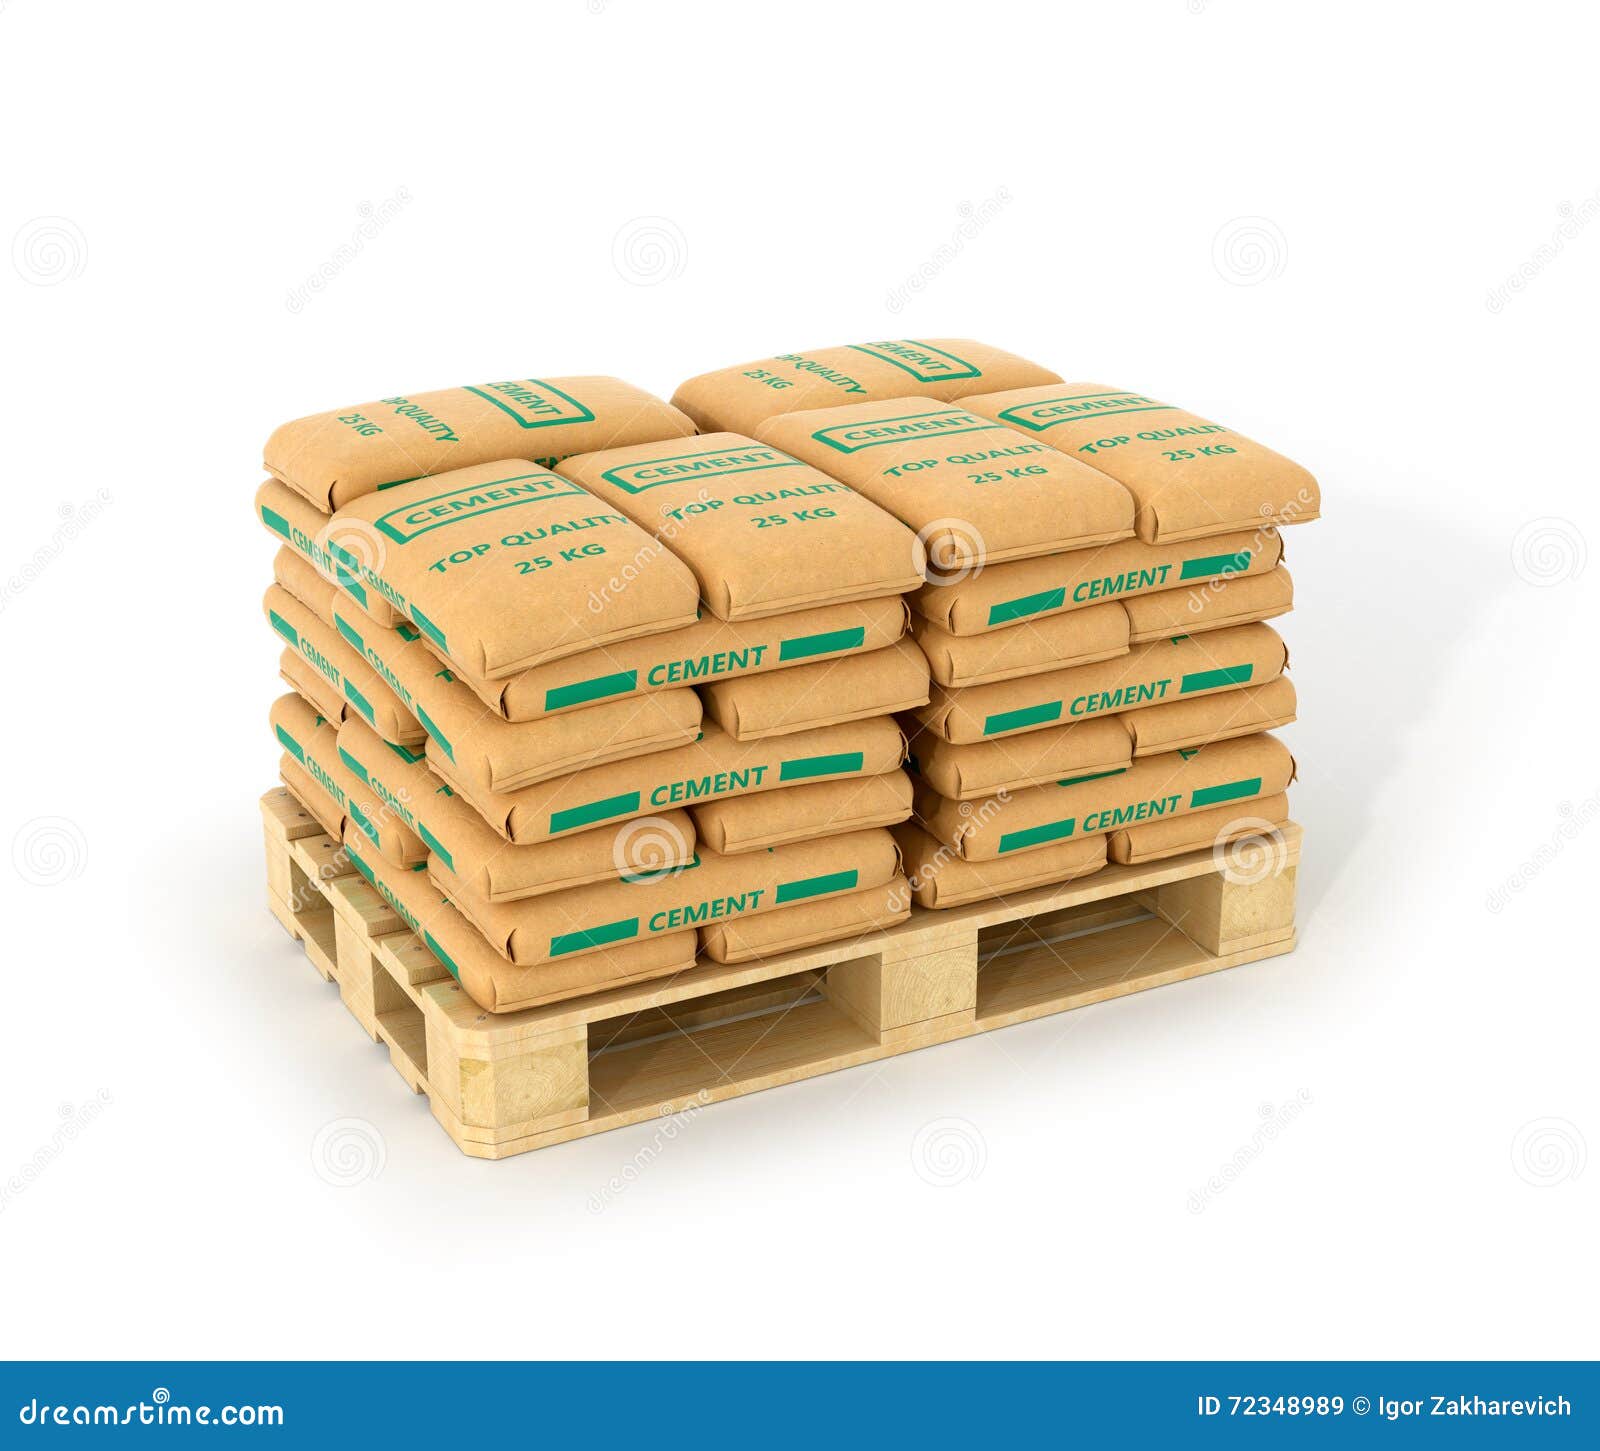 Discover 78+ concrete bags pallet best - in.cdgdbentre